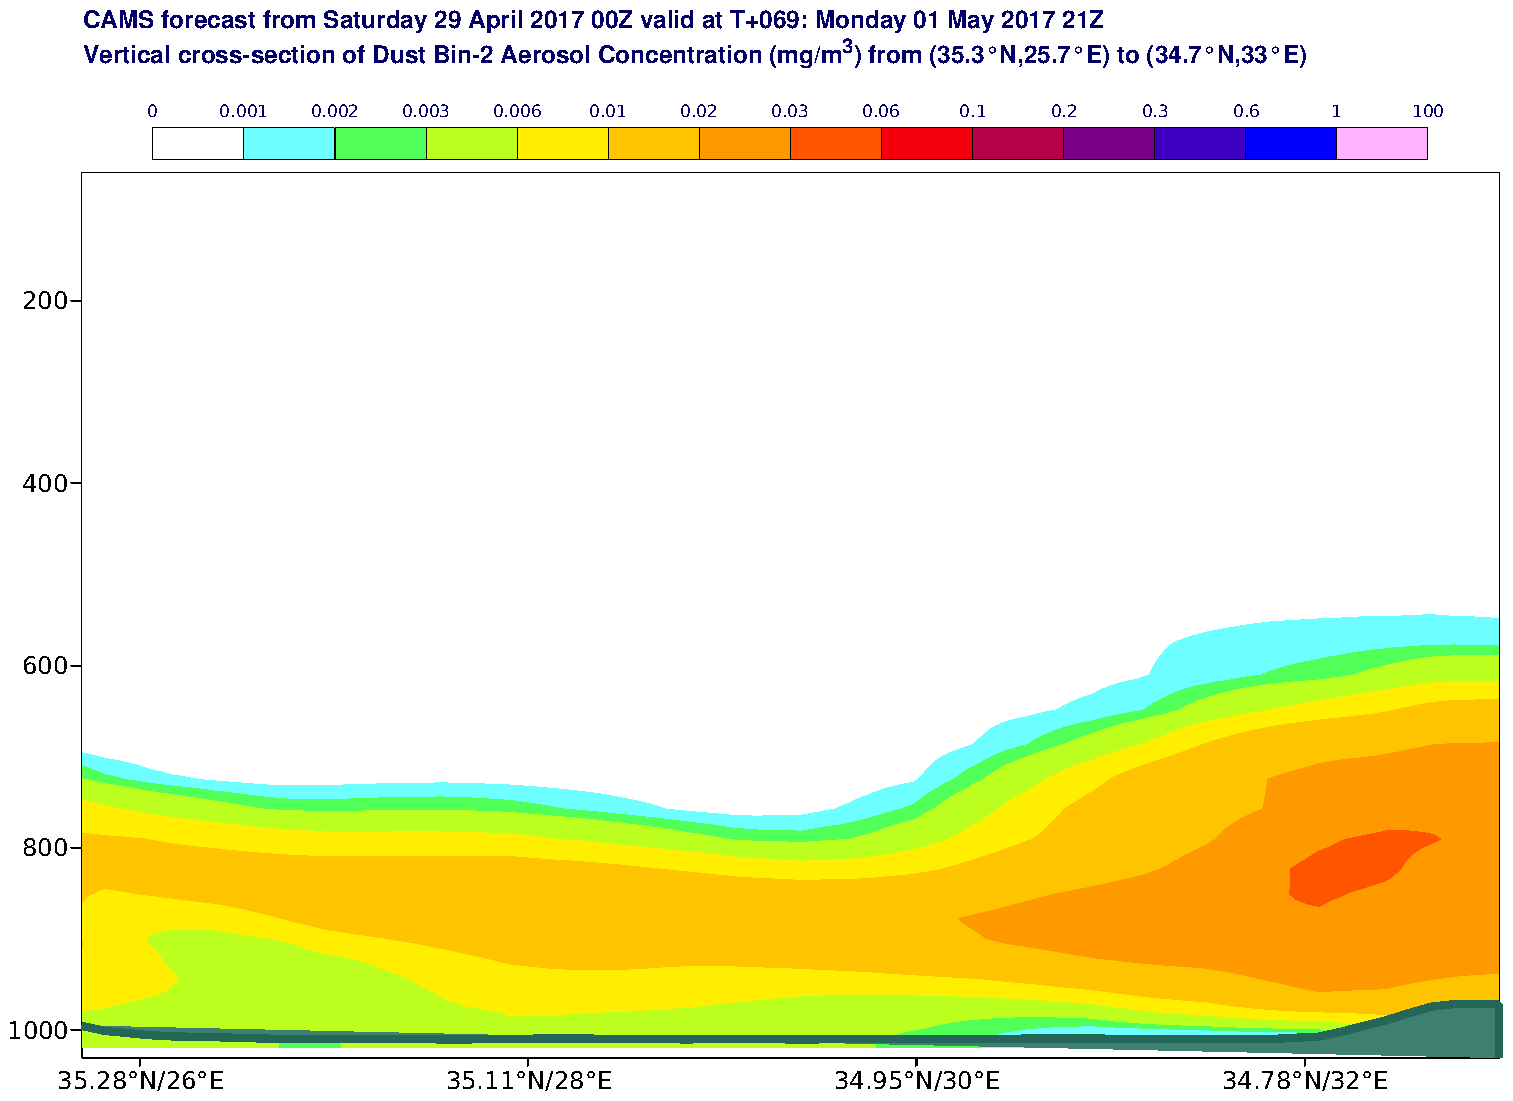 Vertical cross-section of Dust Bin-2 Aerosol Concentration (mg/m3) valid at T69 - 2017-05-01 21:00